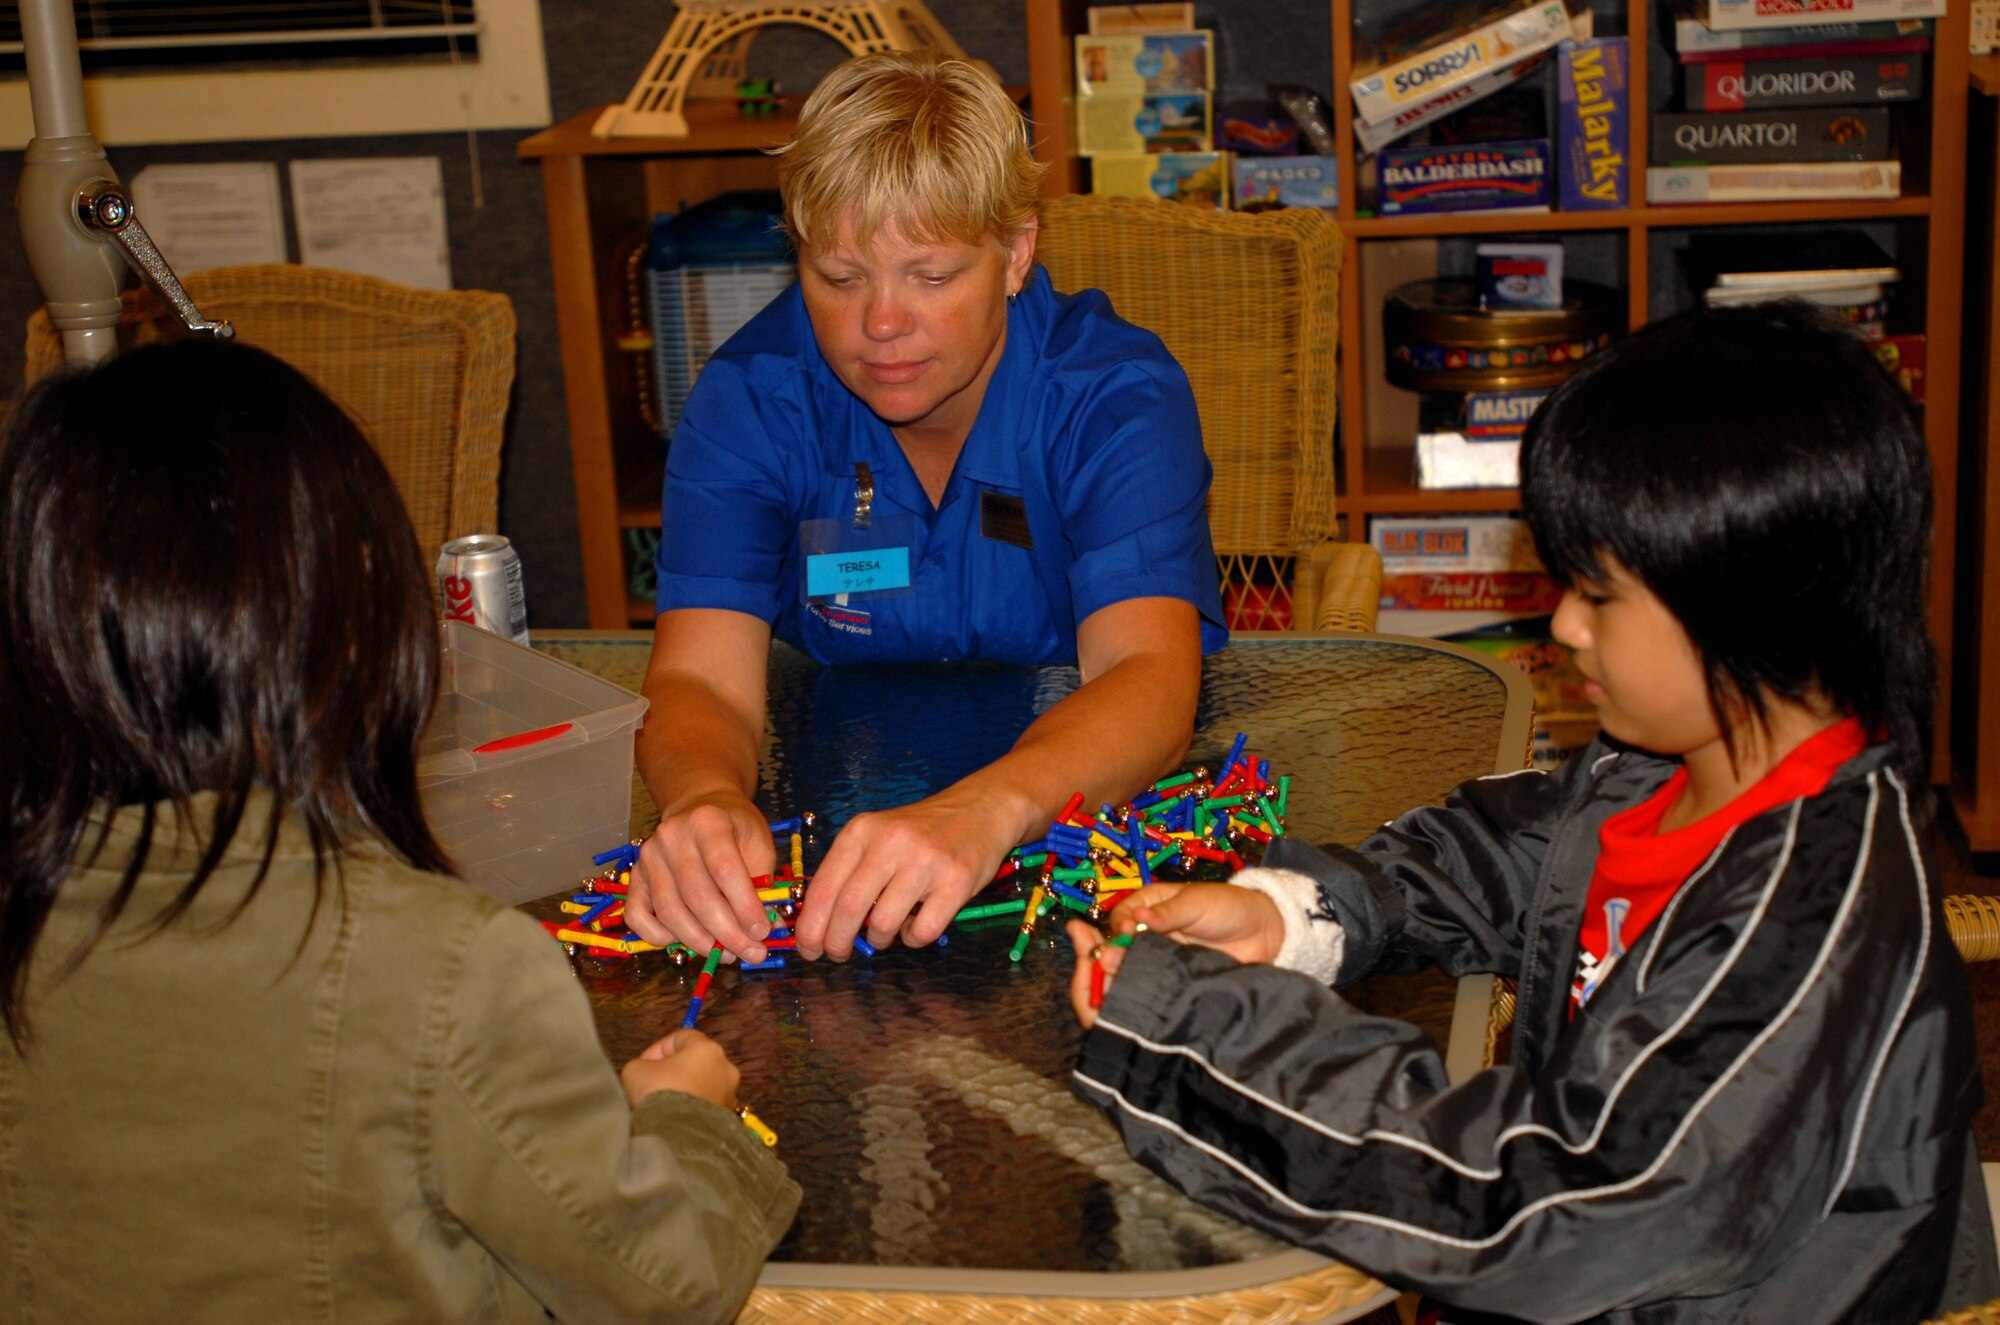 Teresa Witschen (center), 18th Services Squadron youth center manager, plays with Okinawan children during the Kadena and Chatan Town lock-in cultural exchange Aug. 10. The lock-in, which began at 8 p.m. and lasted until 8 a.m. the next day, was organized by the 18th SVS youth center staff and the Chatan Lion's Club. 
(U.S. Air Force photo/Senior Airman Nestor Cruz)